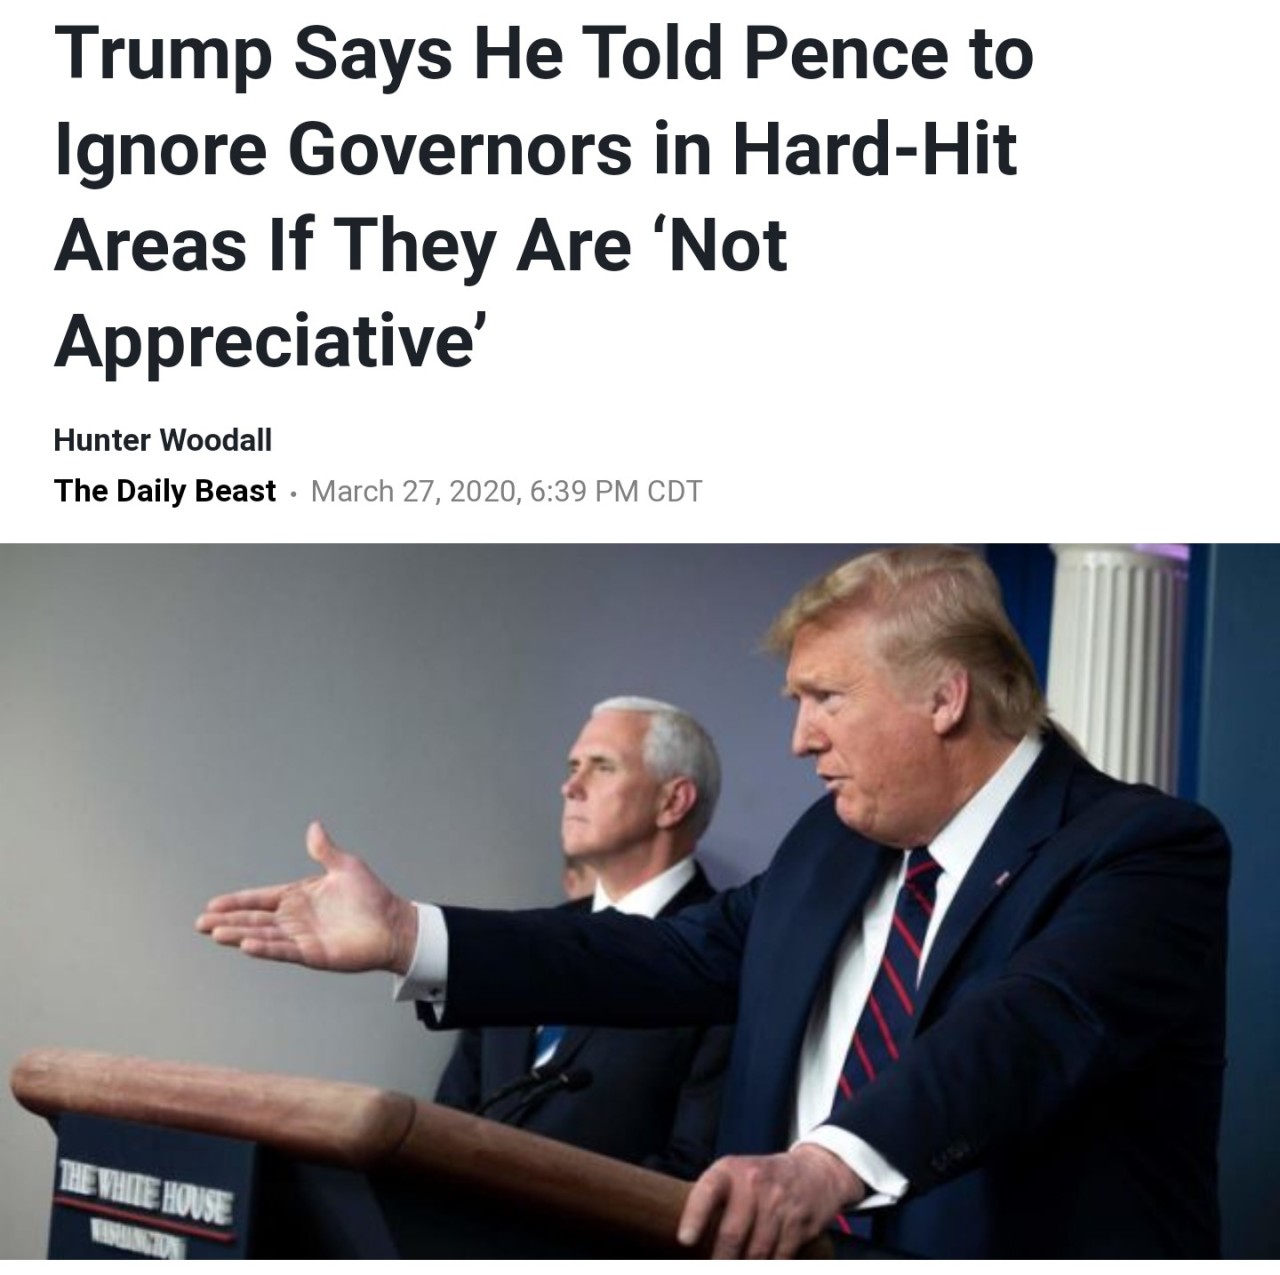 funny anti valentines day - Trump Says He Told Pence to Ignore Governors in HardHit Areas If They Are 'Not Appreciative' Hunter Woodall The Daily Beast , Cdt Etite House